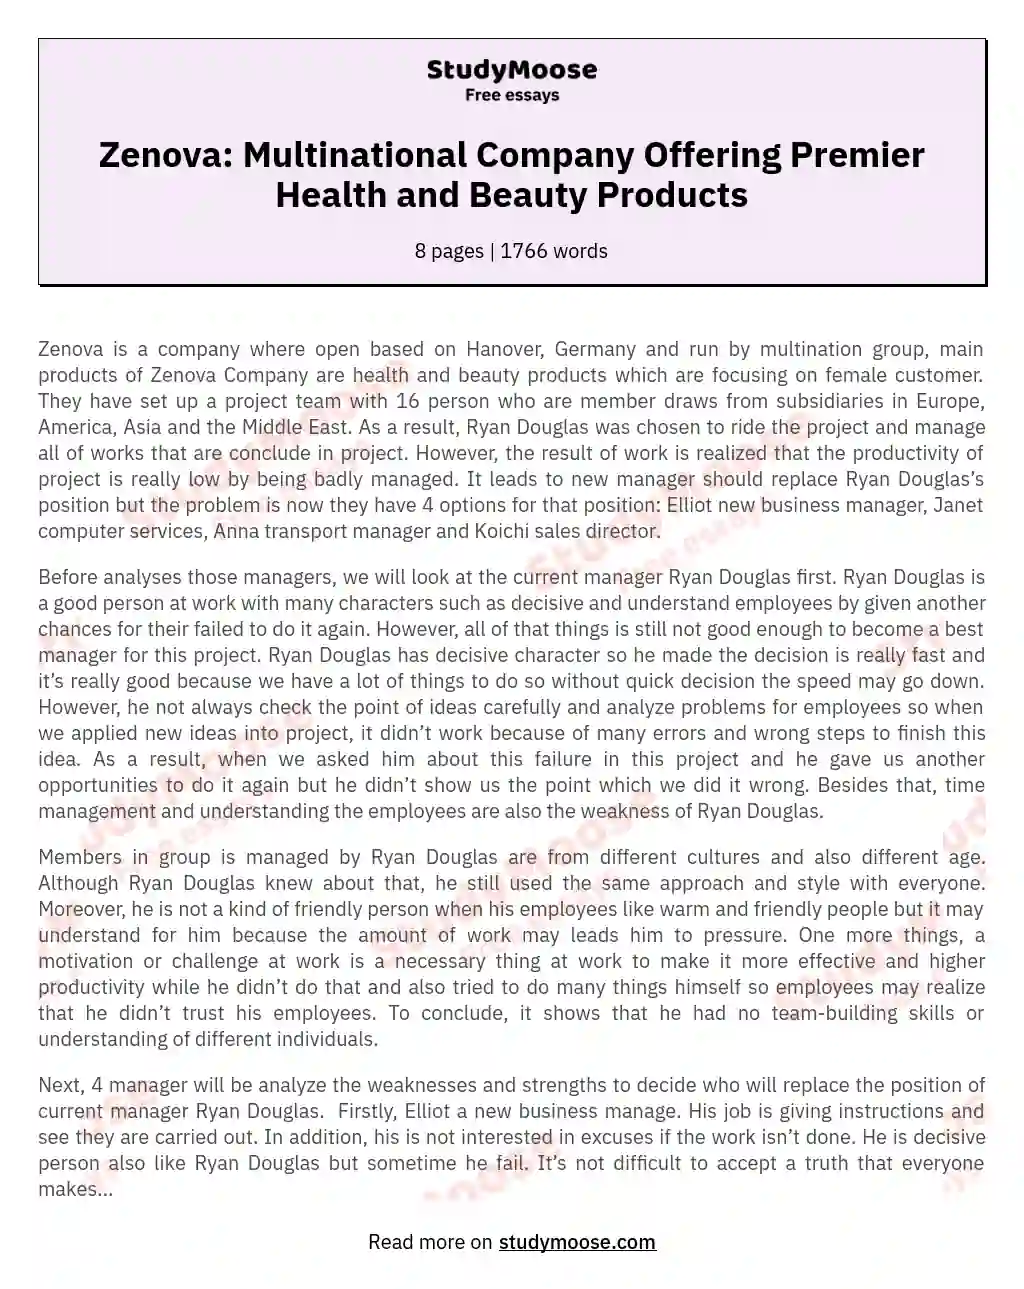 Zenova: Multinational Company Offering Premier Health and Beauty Products essay